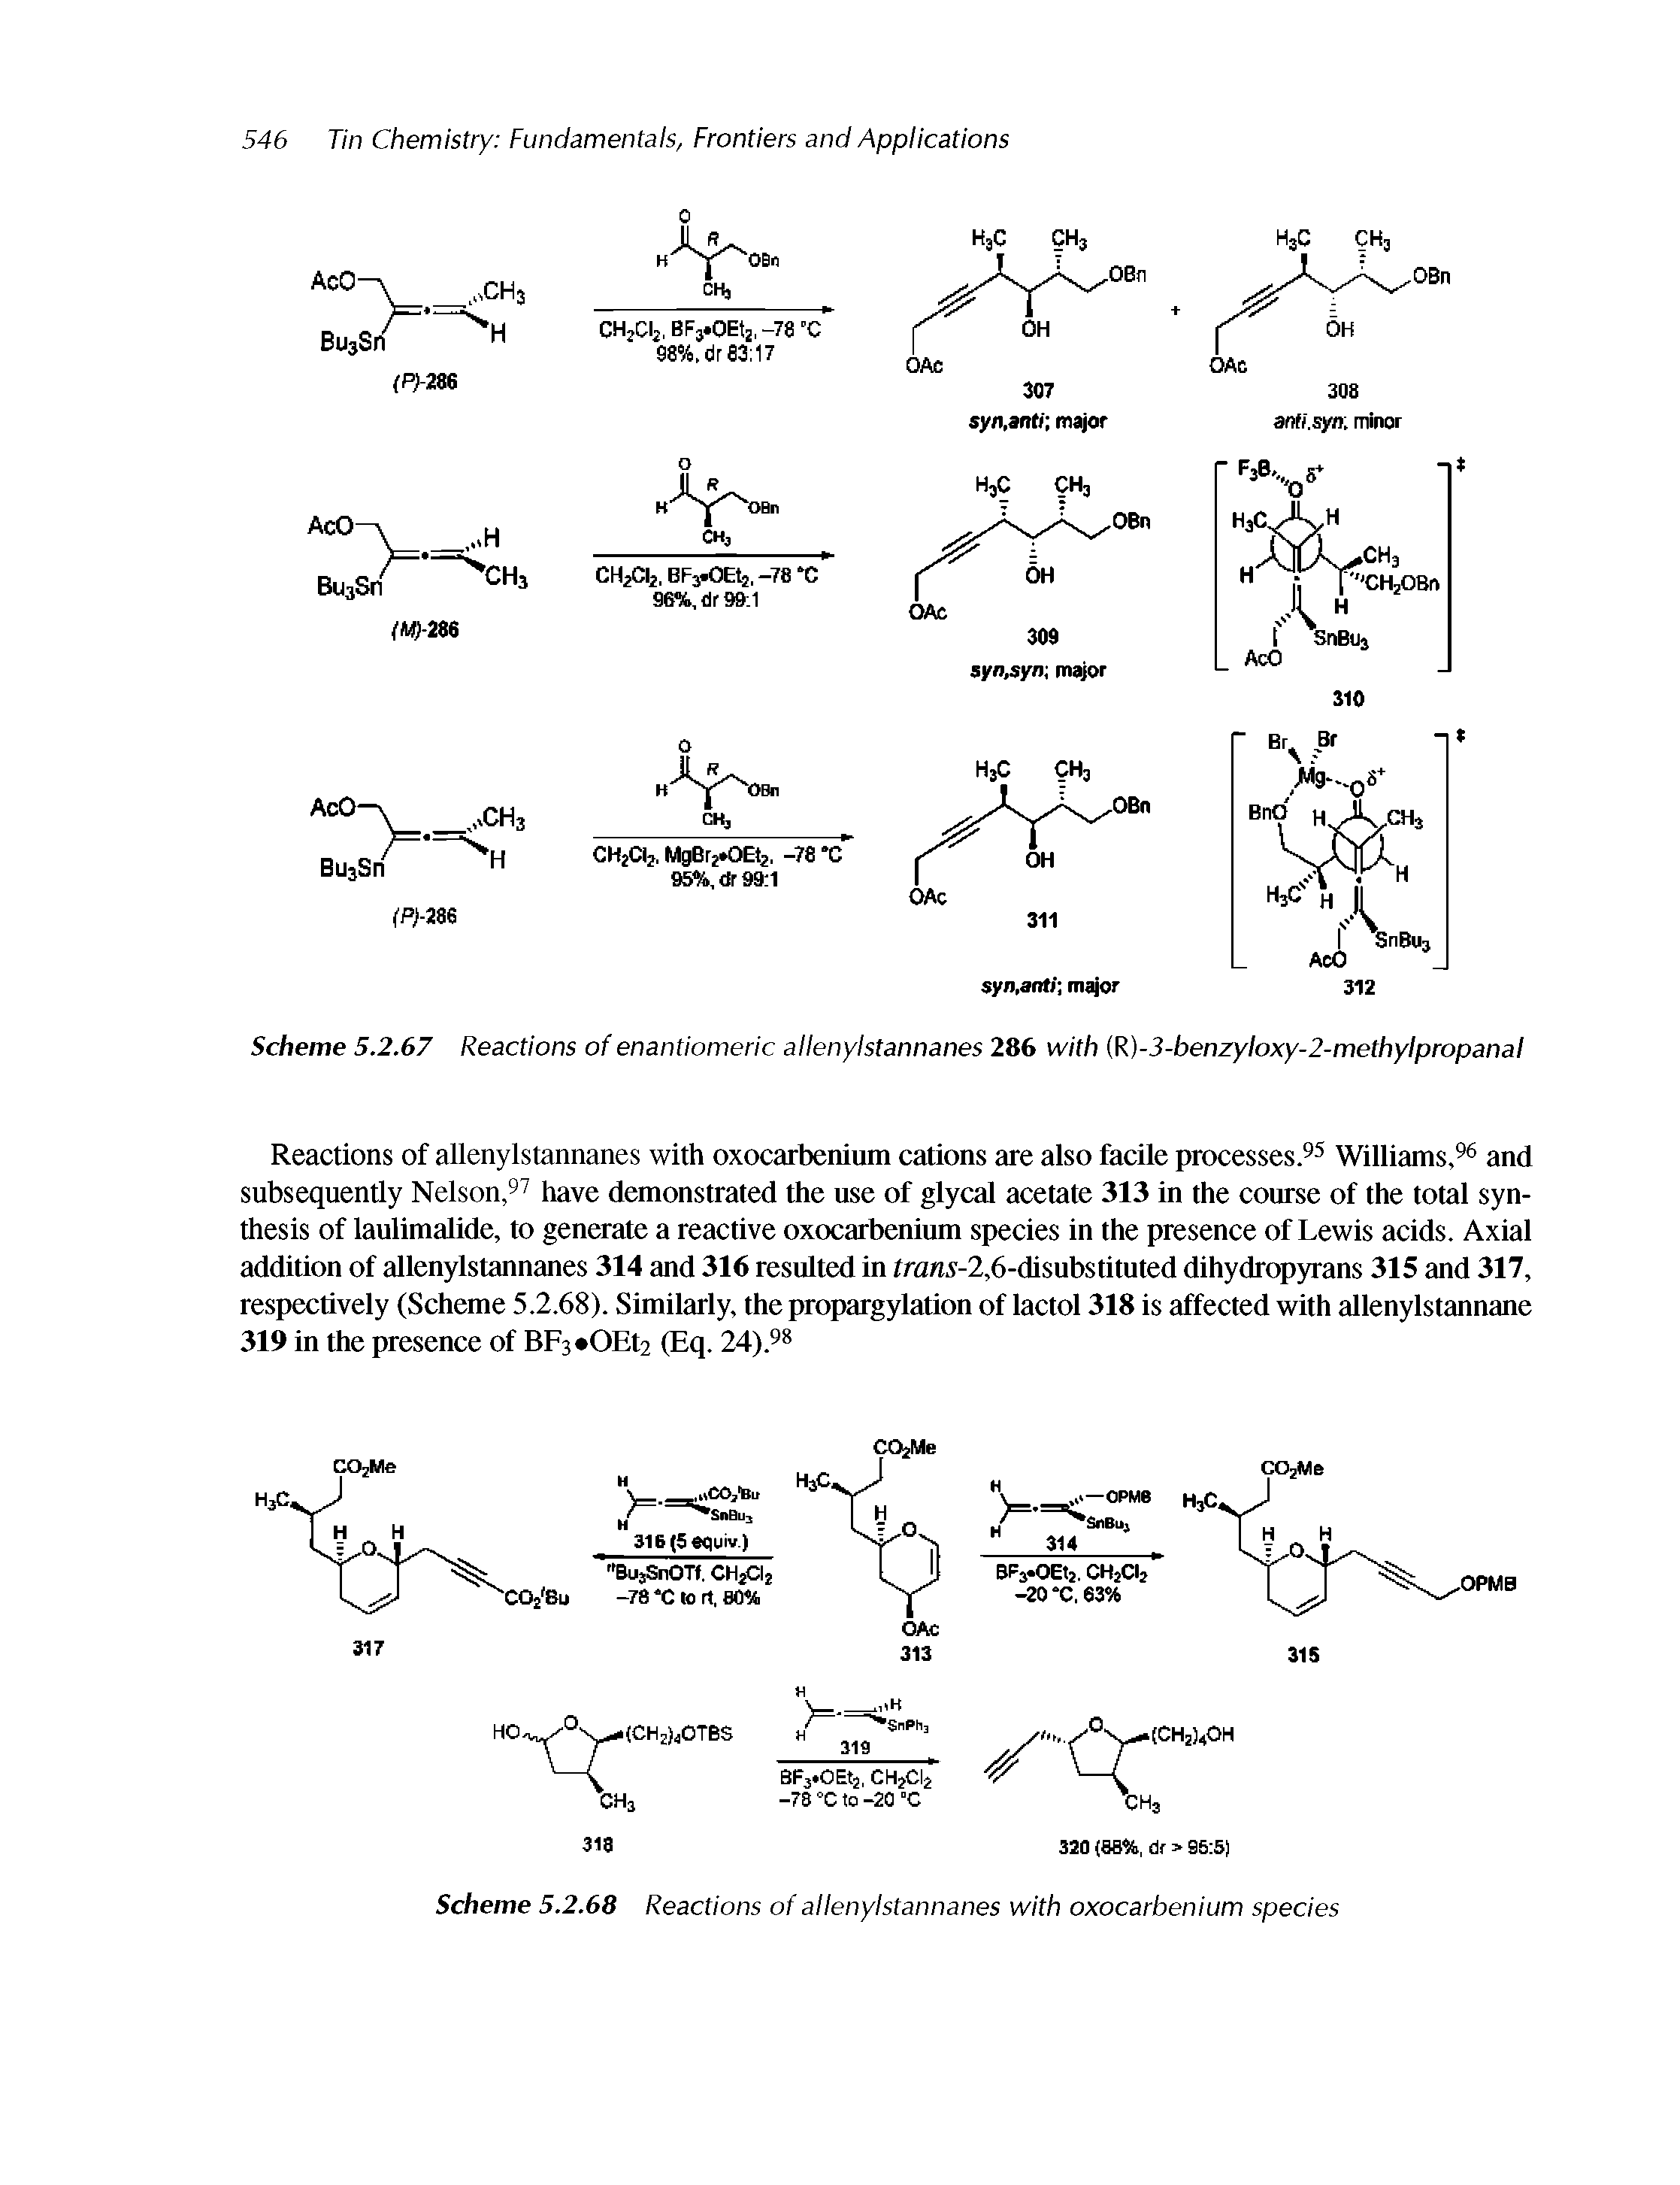 Scheme 5.2.68 Reactions of aiienyistannanes with oxocarbenium species...